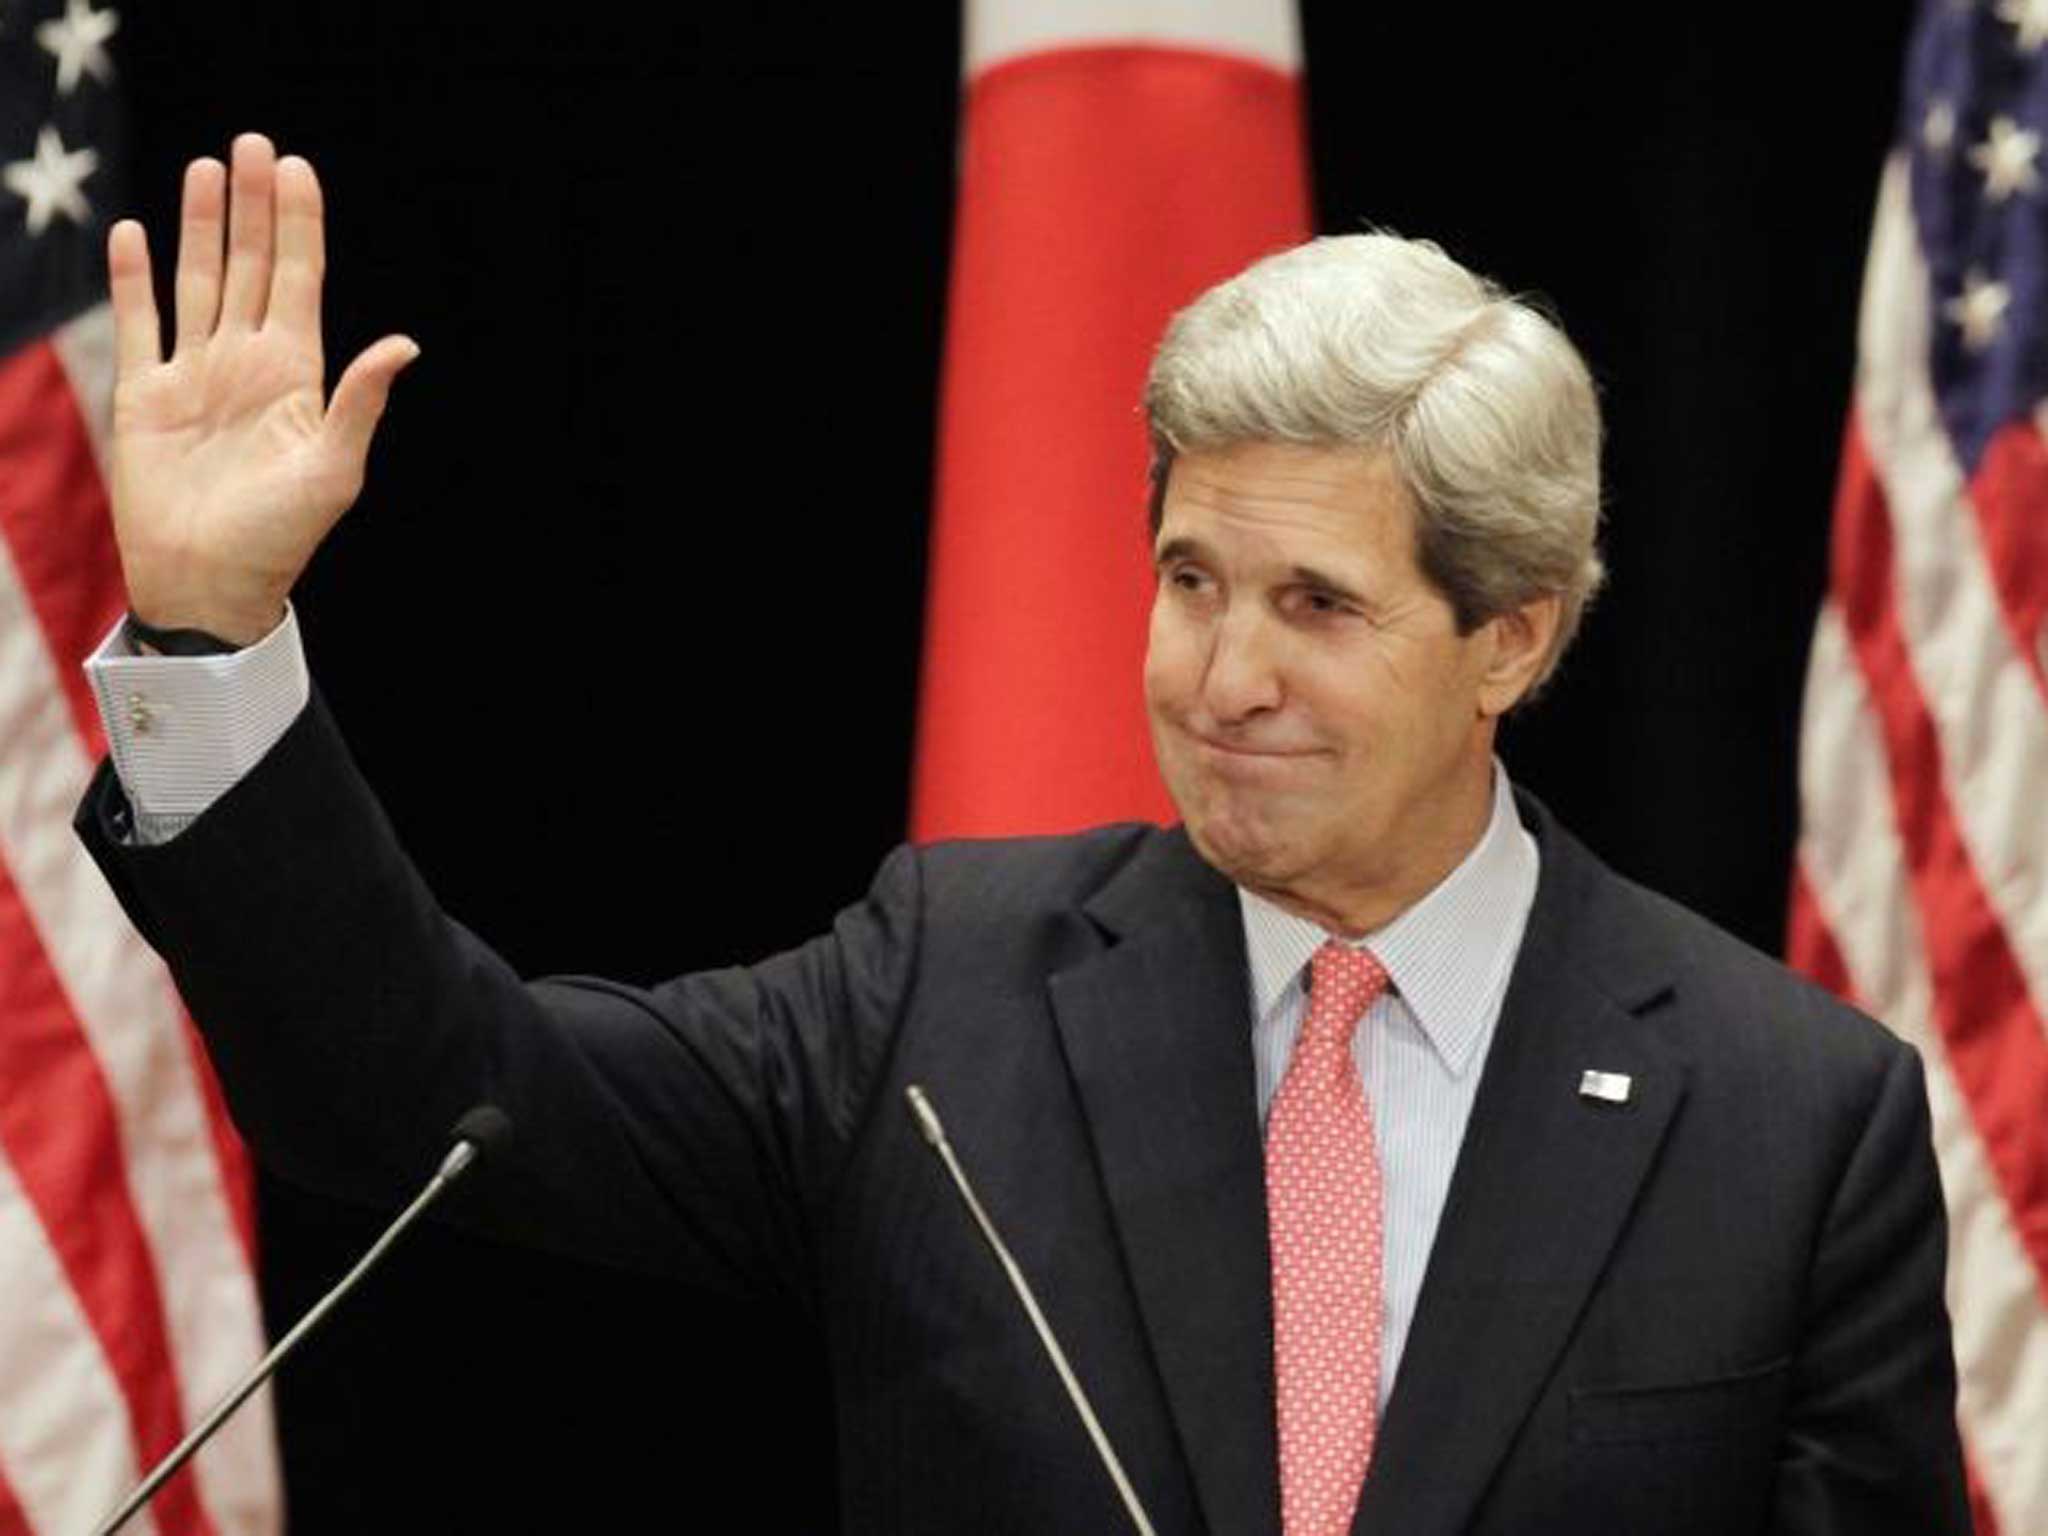 Nothing to lose: Secretary of State is likely to be John Kerry’s last big political post. He intends to go out with a flourish